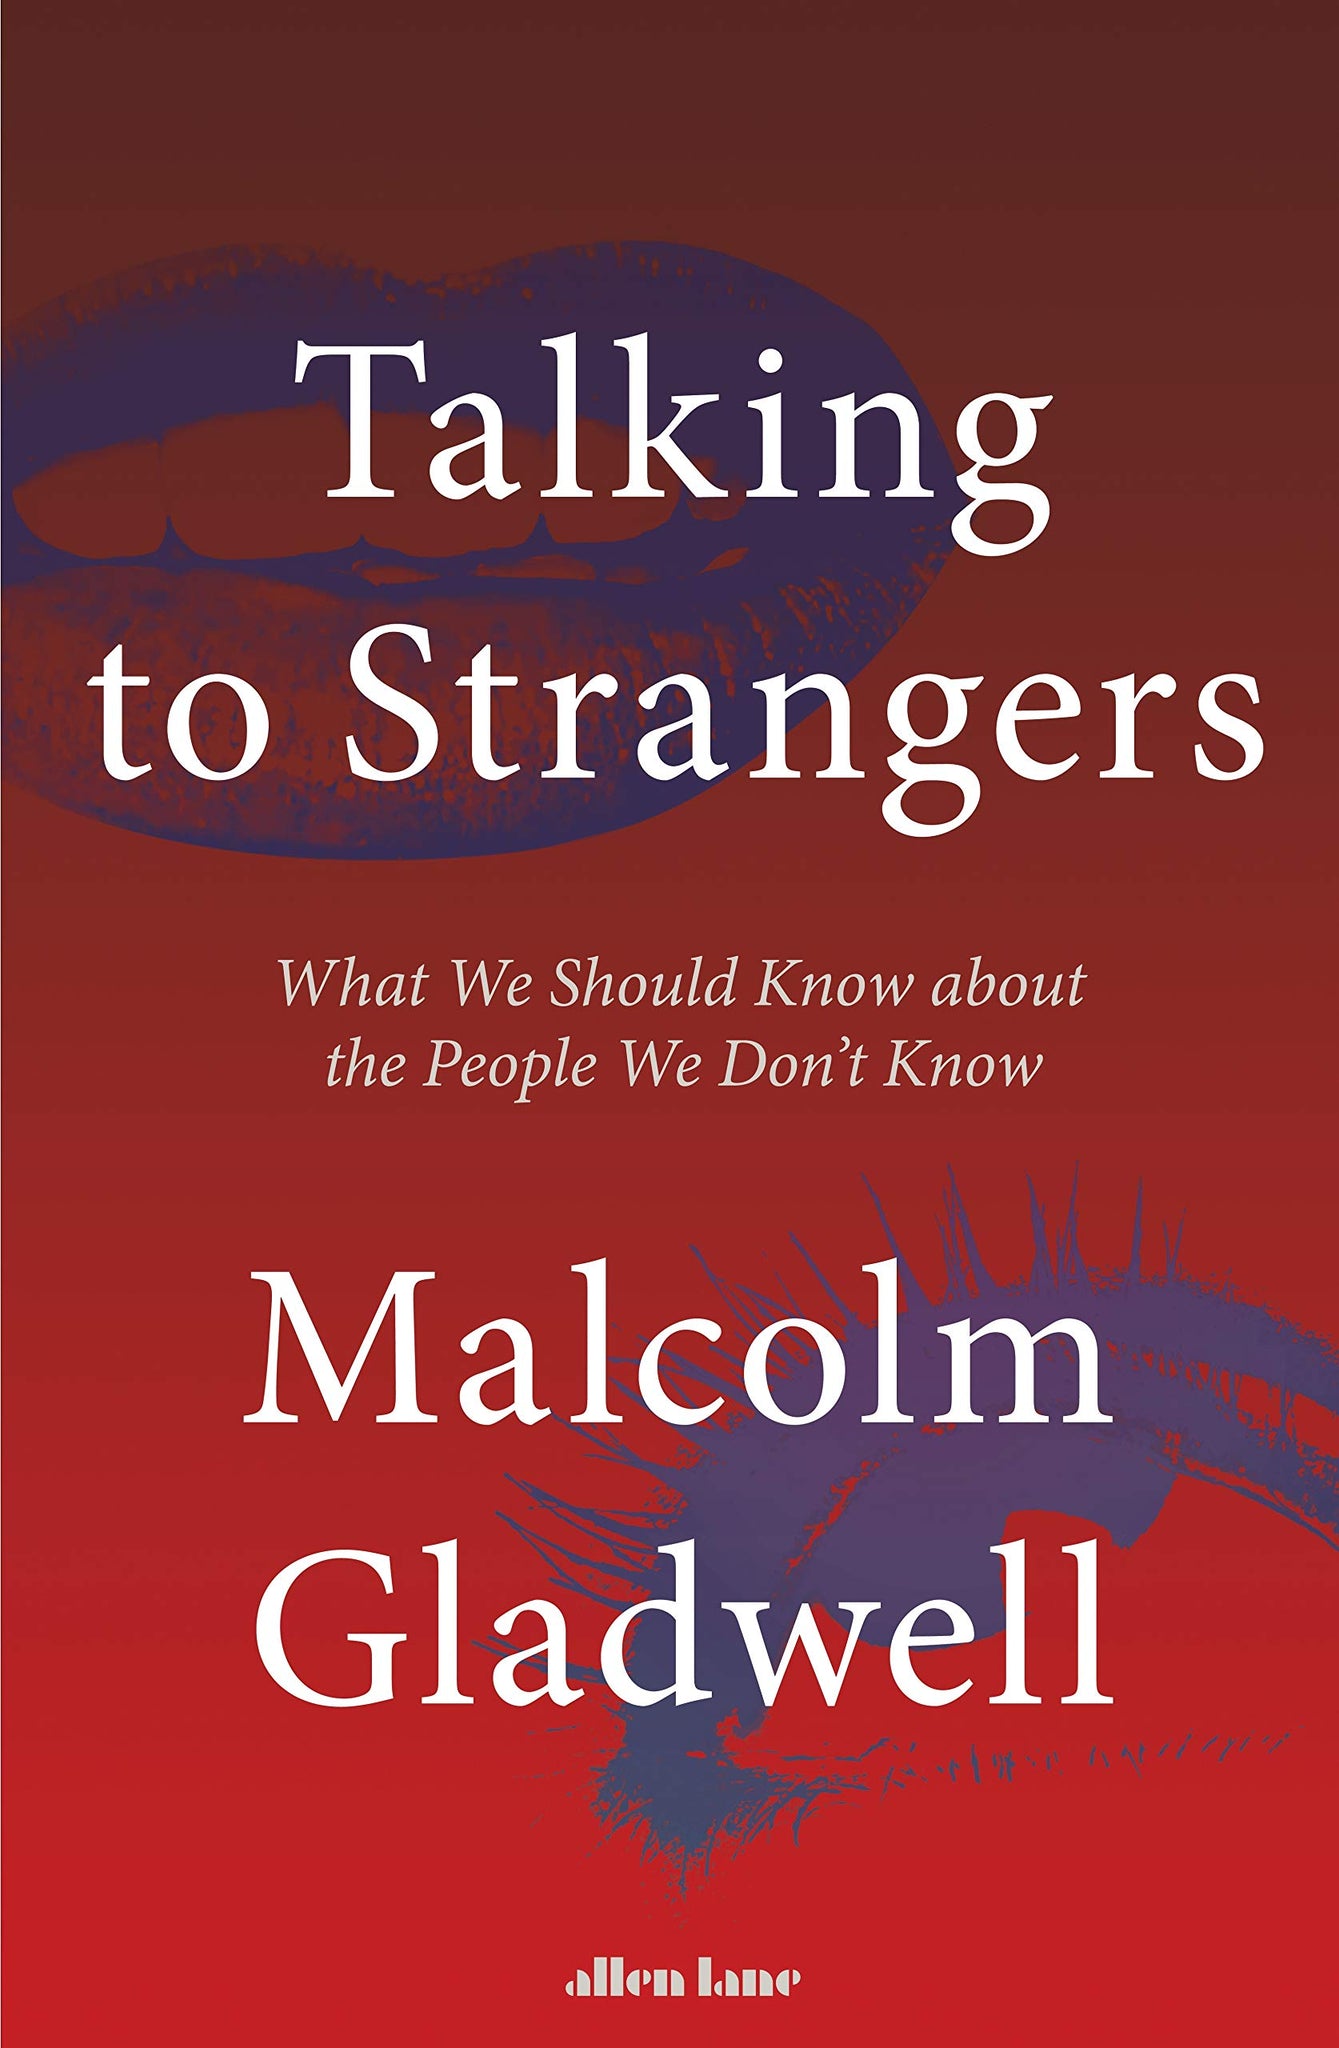 Talking to Strangers: What We Should Know About the People We Don’t Know by Malcolm Gladwell